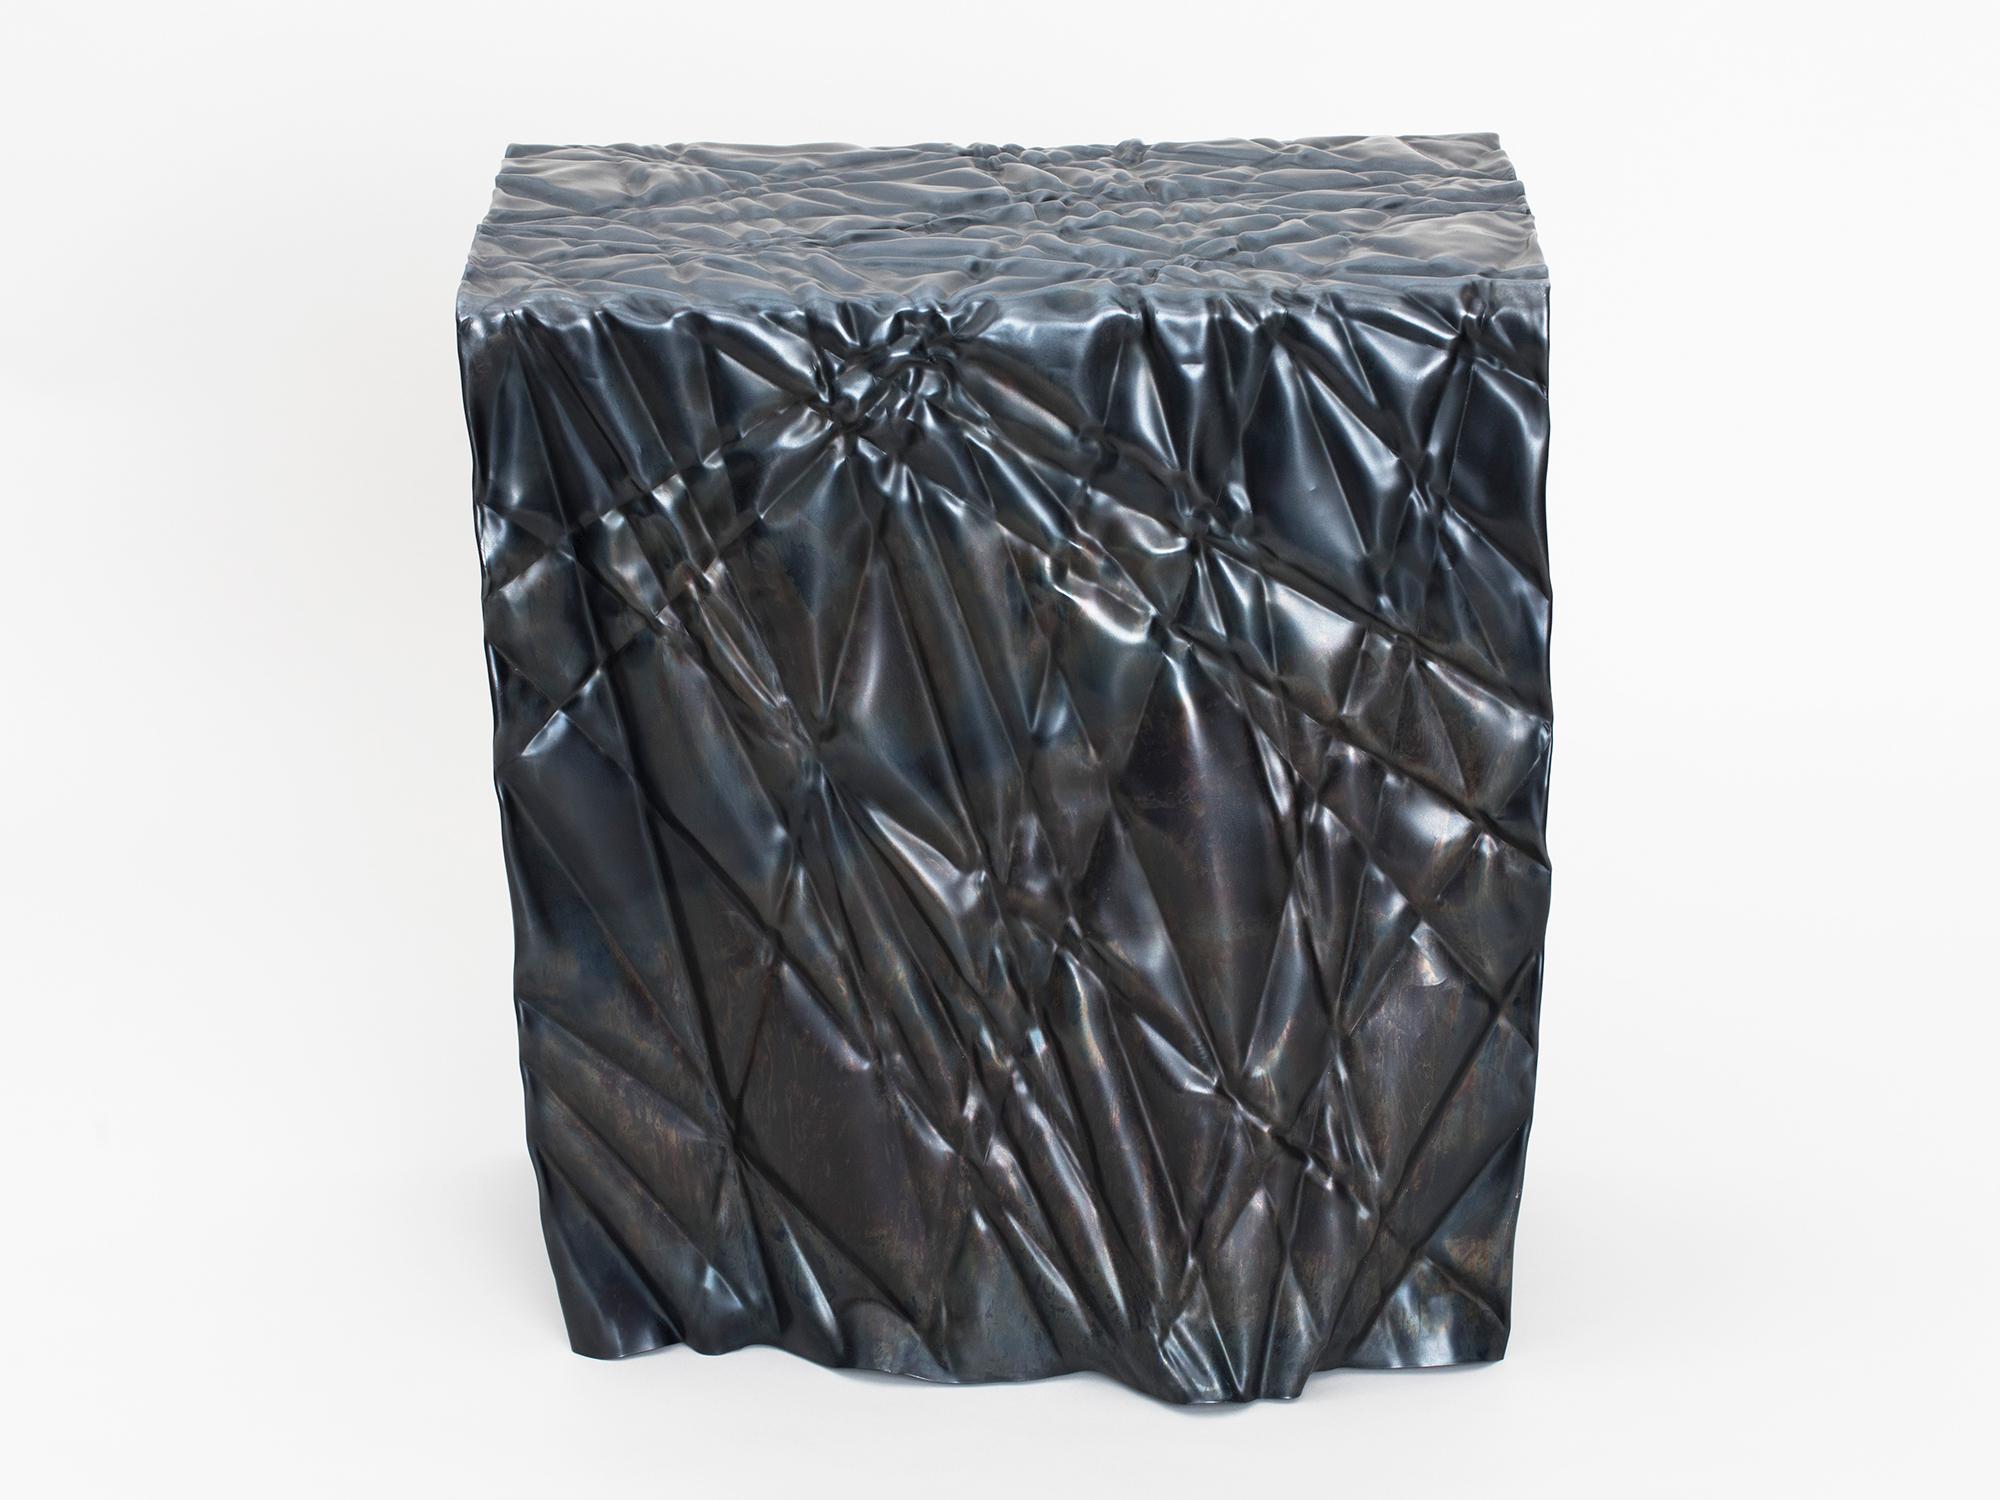 Wrinkled stool or side table by Omaha-based designer Christopher Prinz, who achieves this unusual texture by repeatedly creasing a thin sheet of steel, resulting in a strong, rigid, and unique form. Hidden leveling feet protect surfaces and ensure